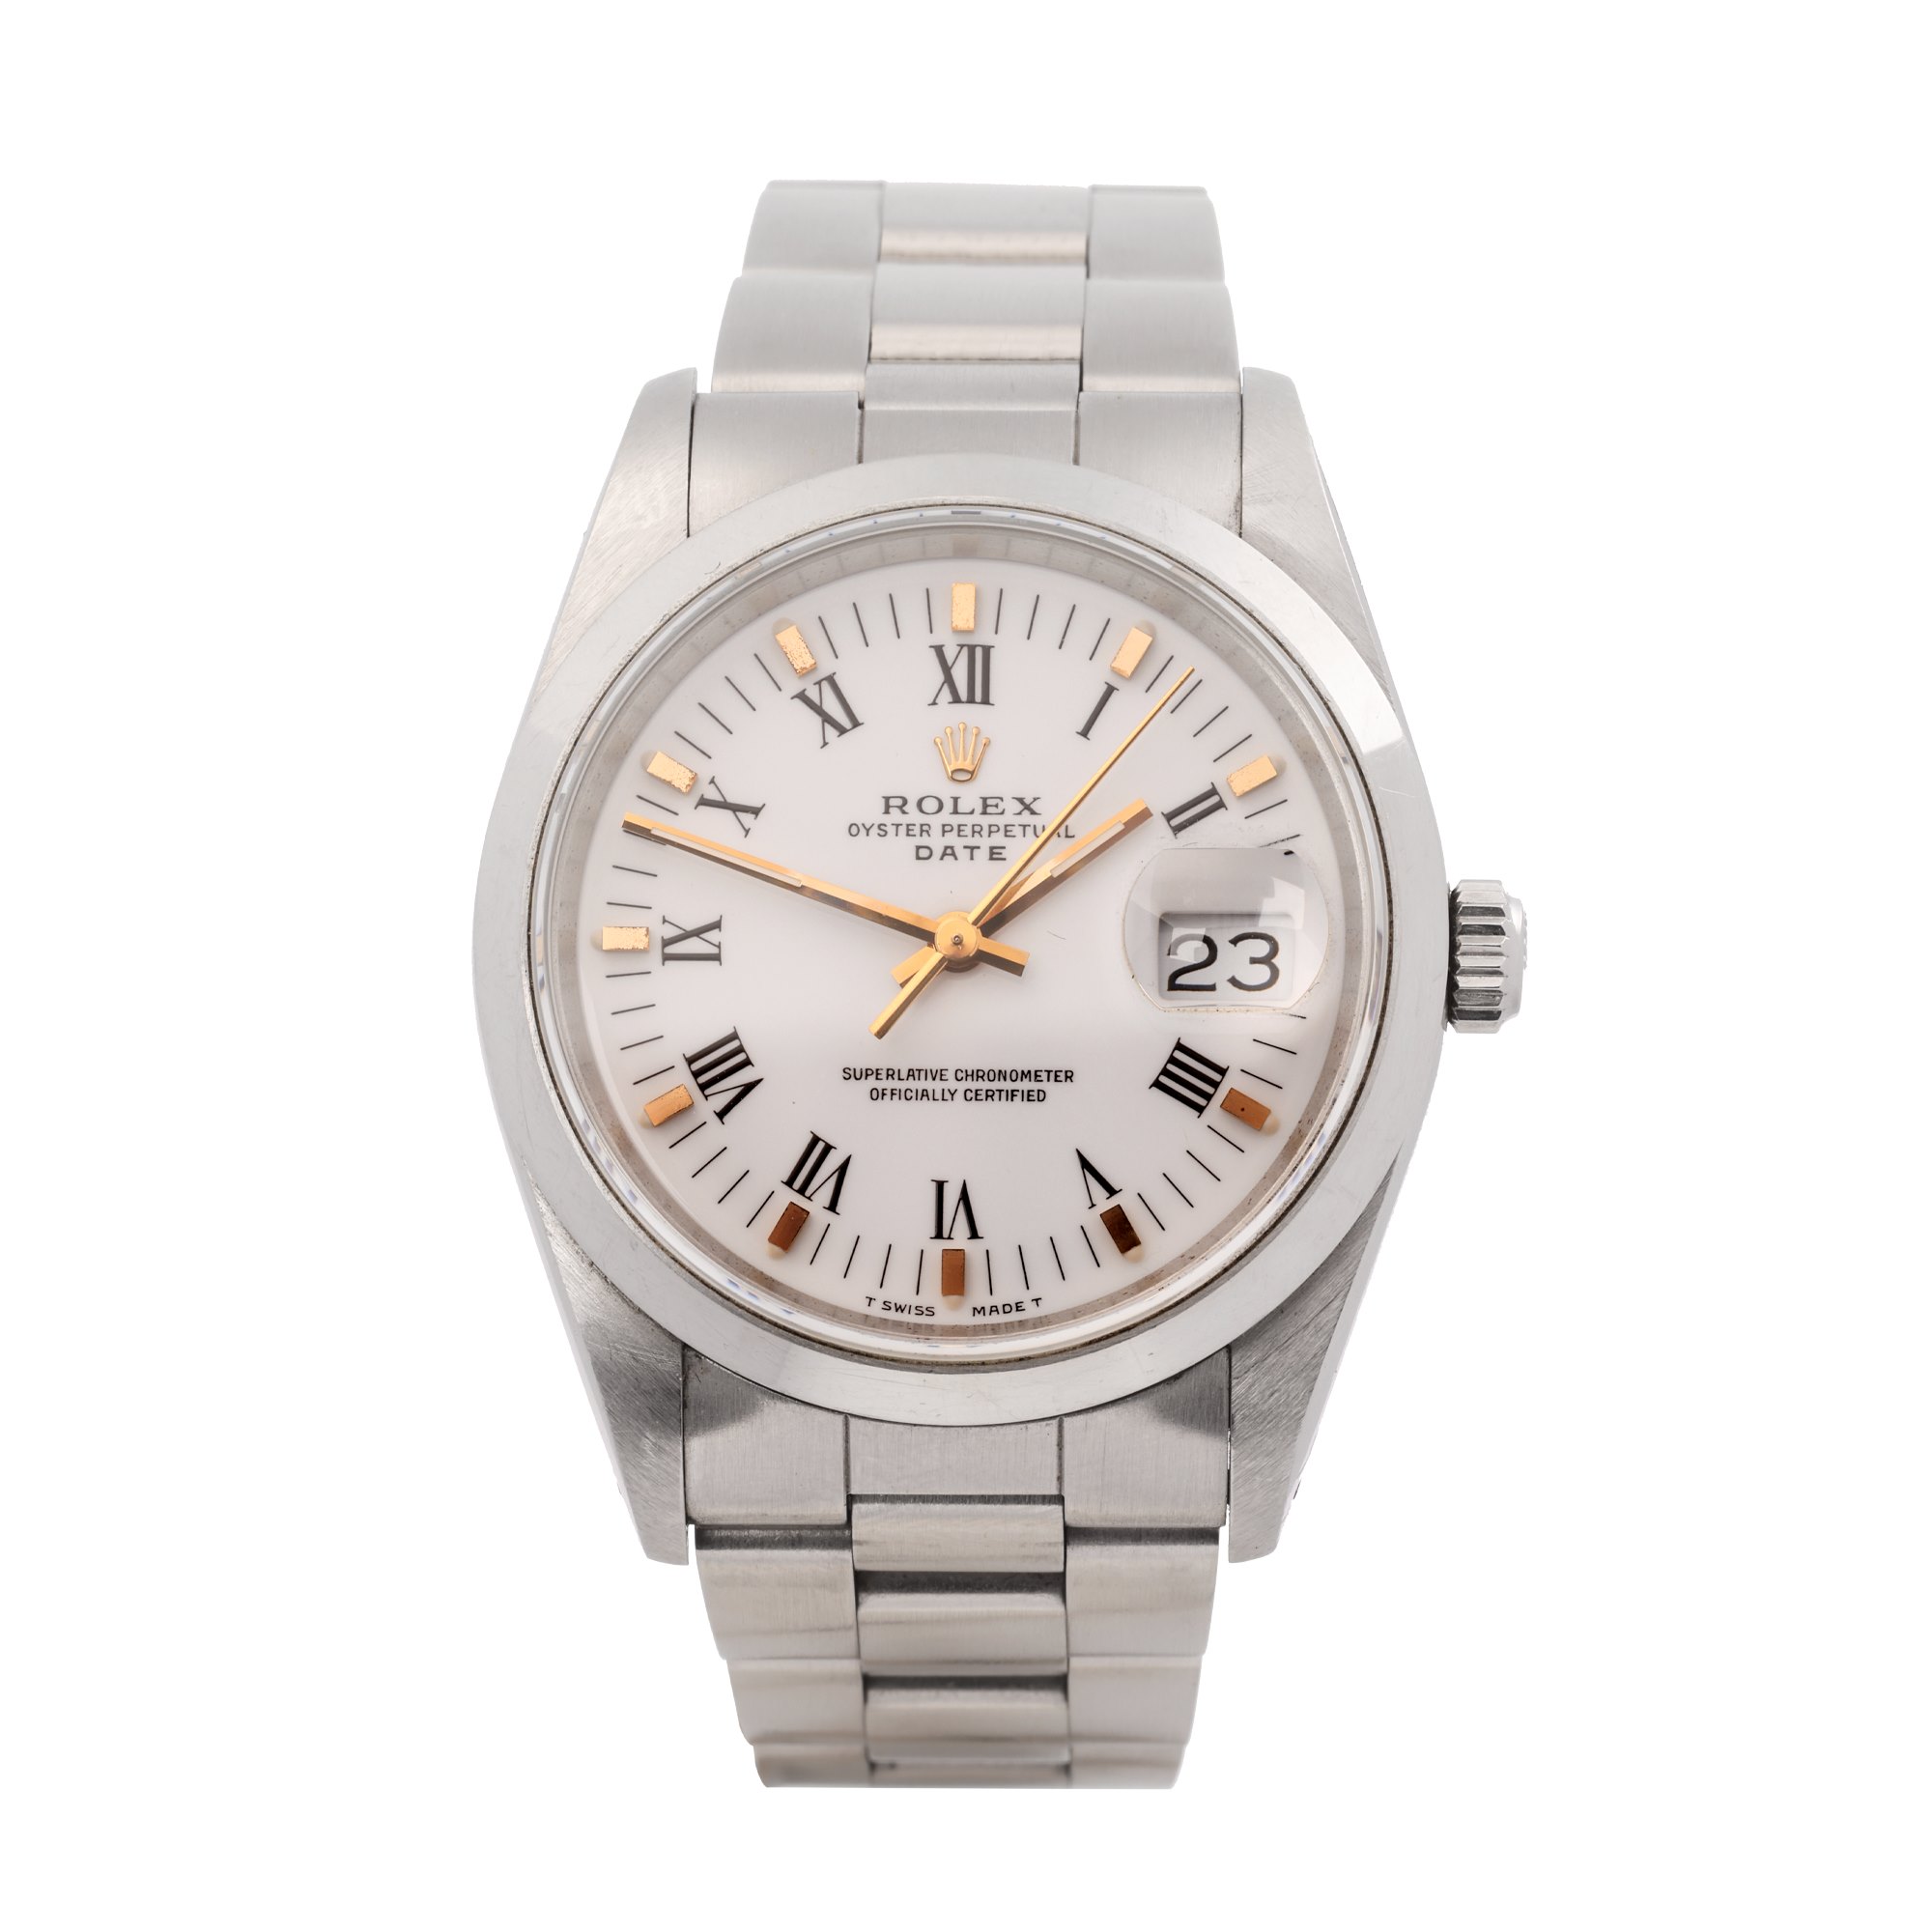 Rolex Oyster Perpetual Date Stainless Steel 15200